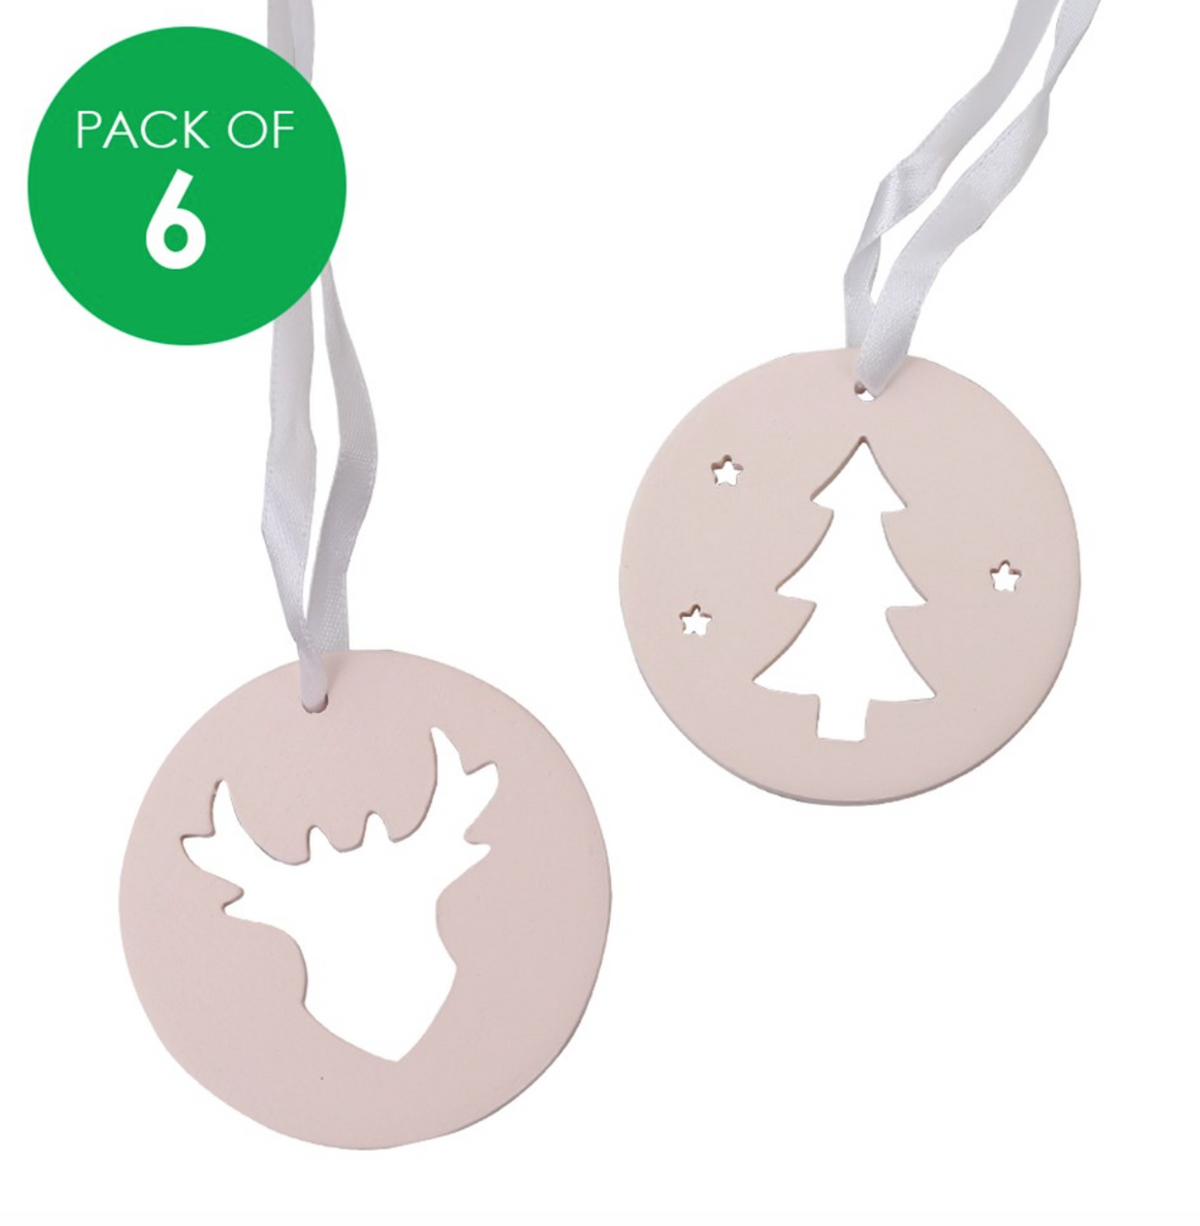 Ceramic Christmas Ornaments Pack of 6